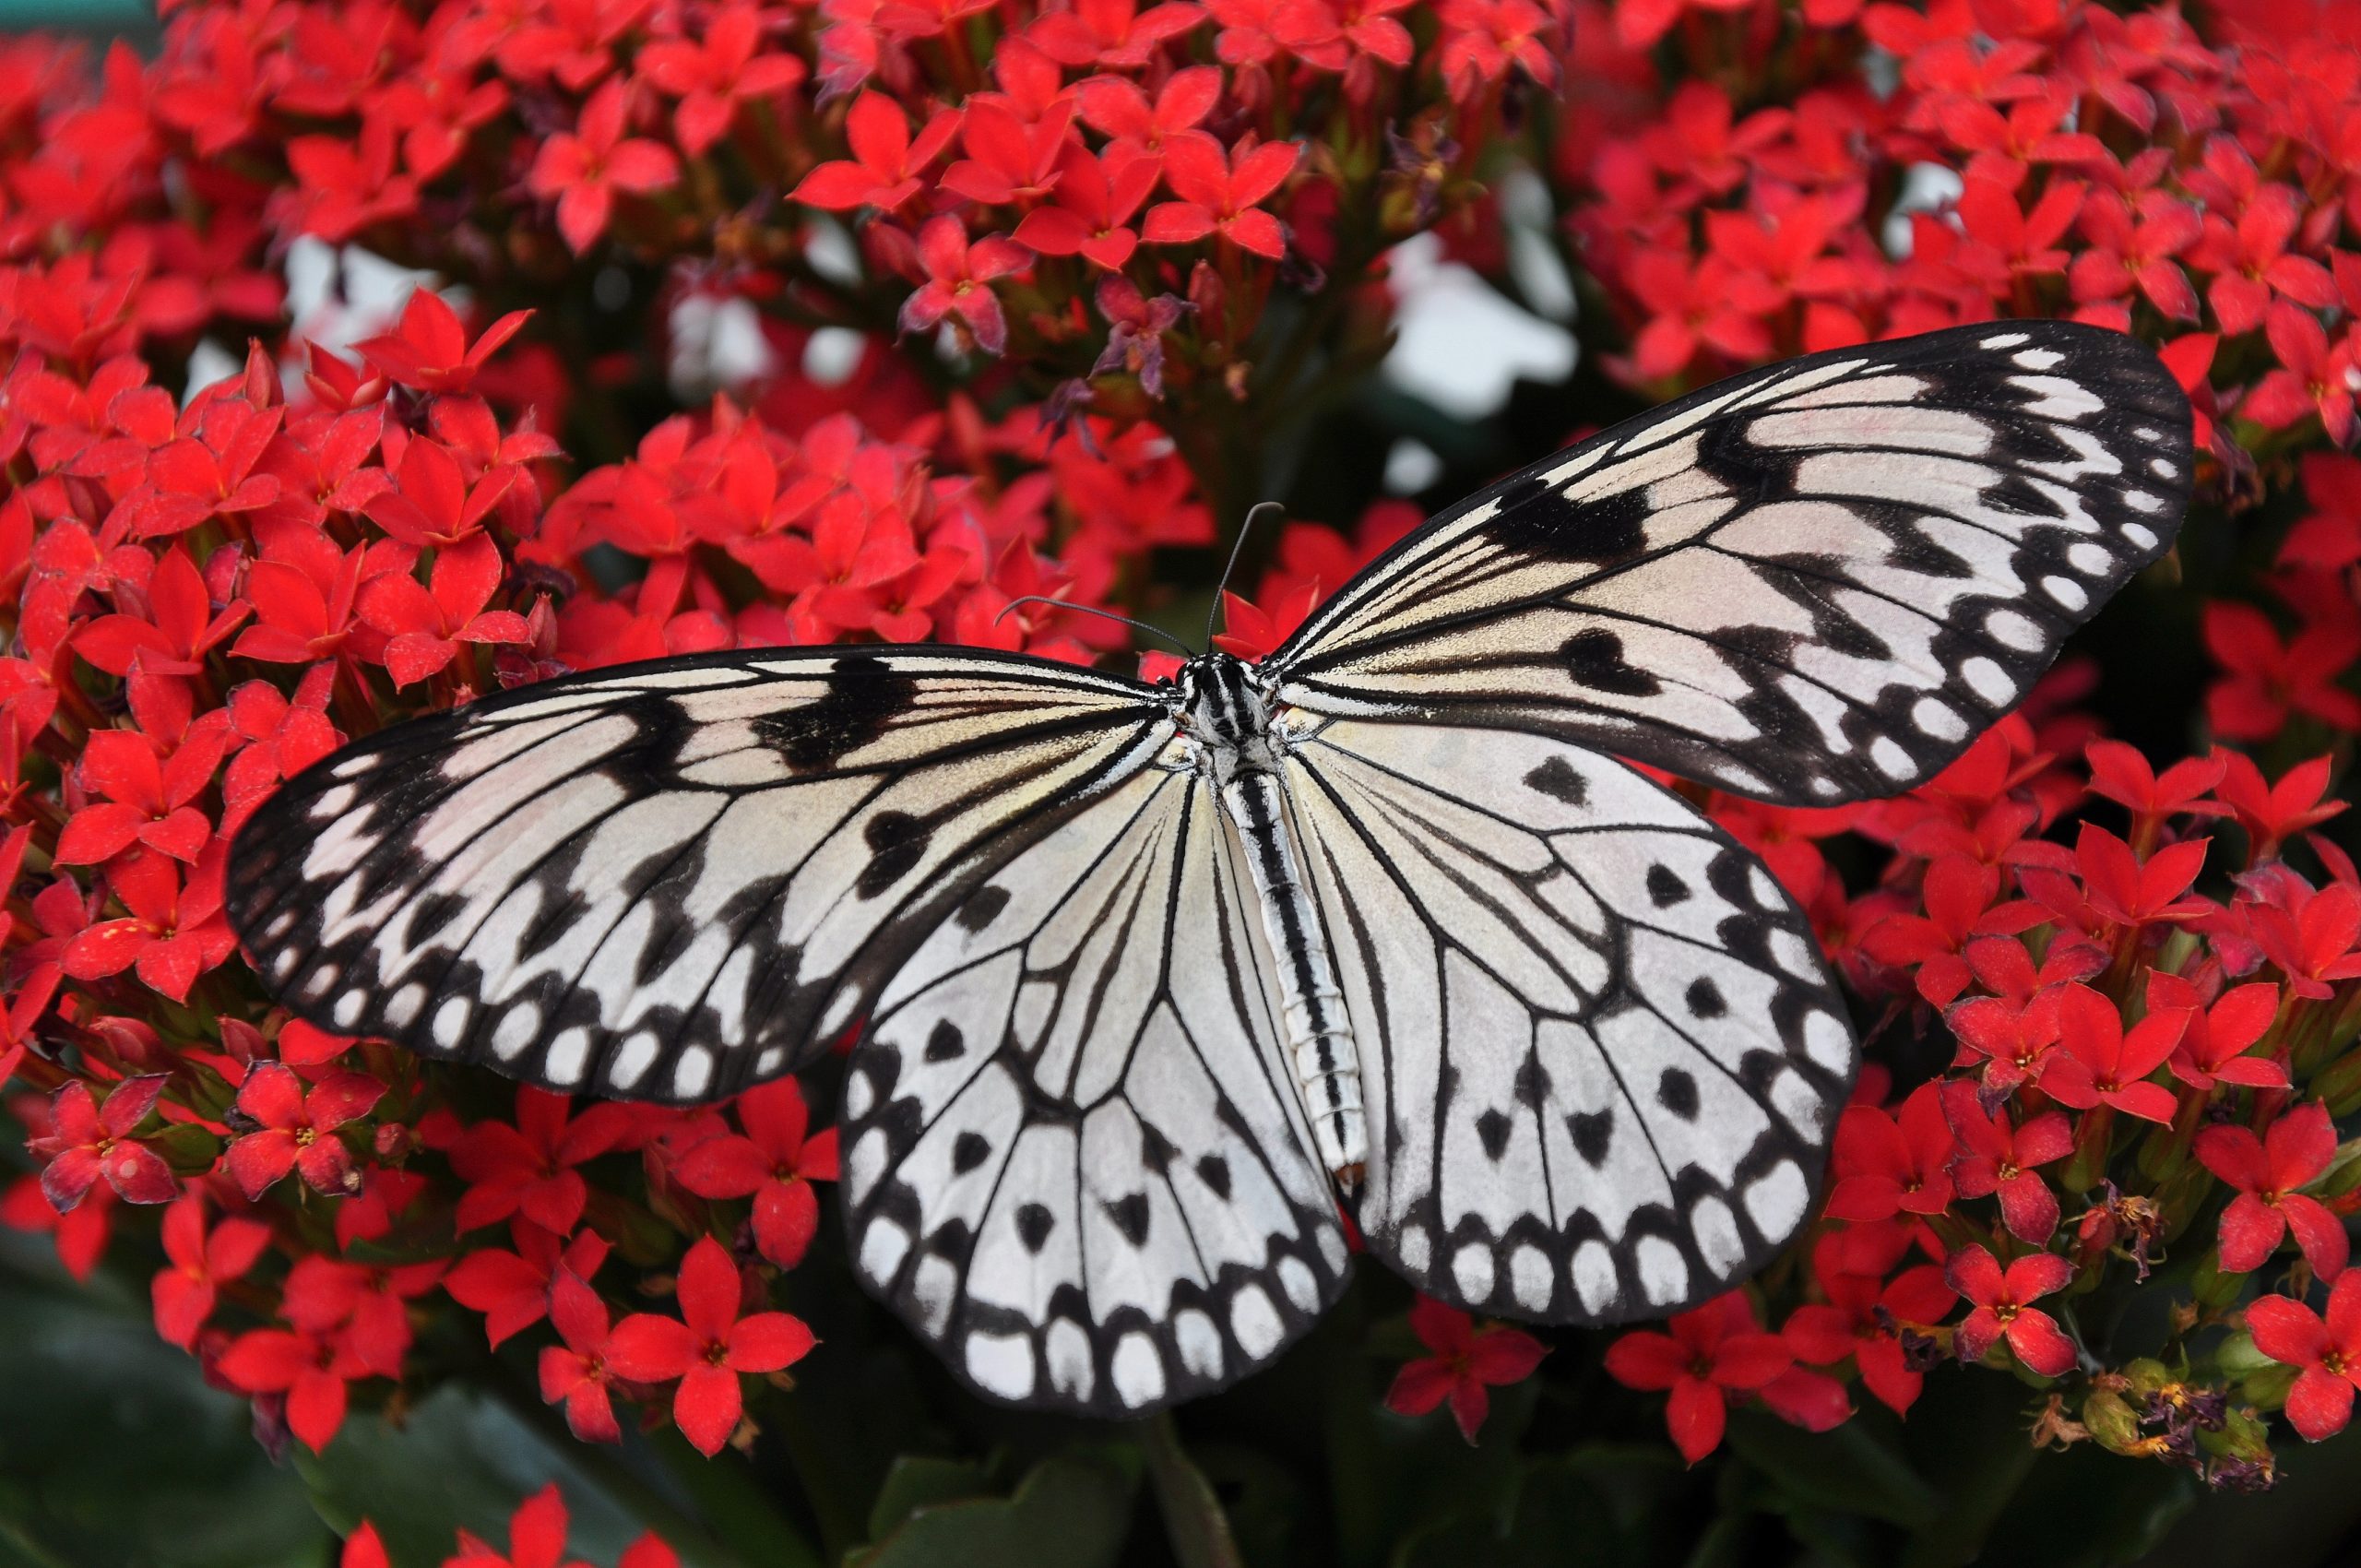 Enjoy the butterfly wonderland when you work remote on your vacation to Scottsdale